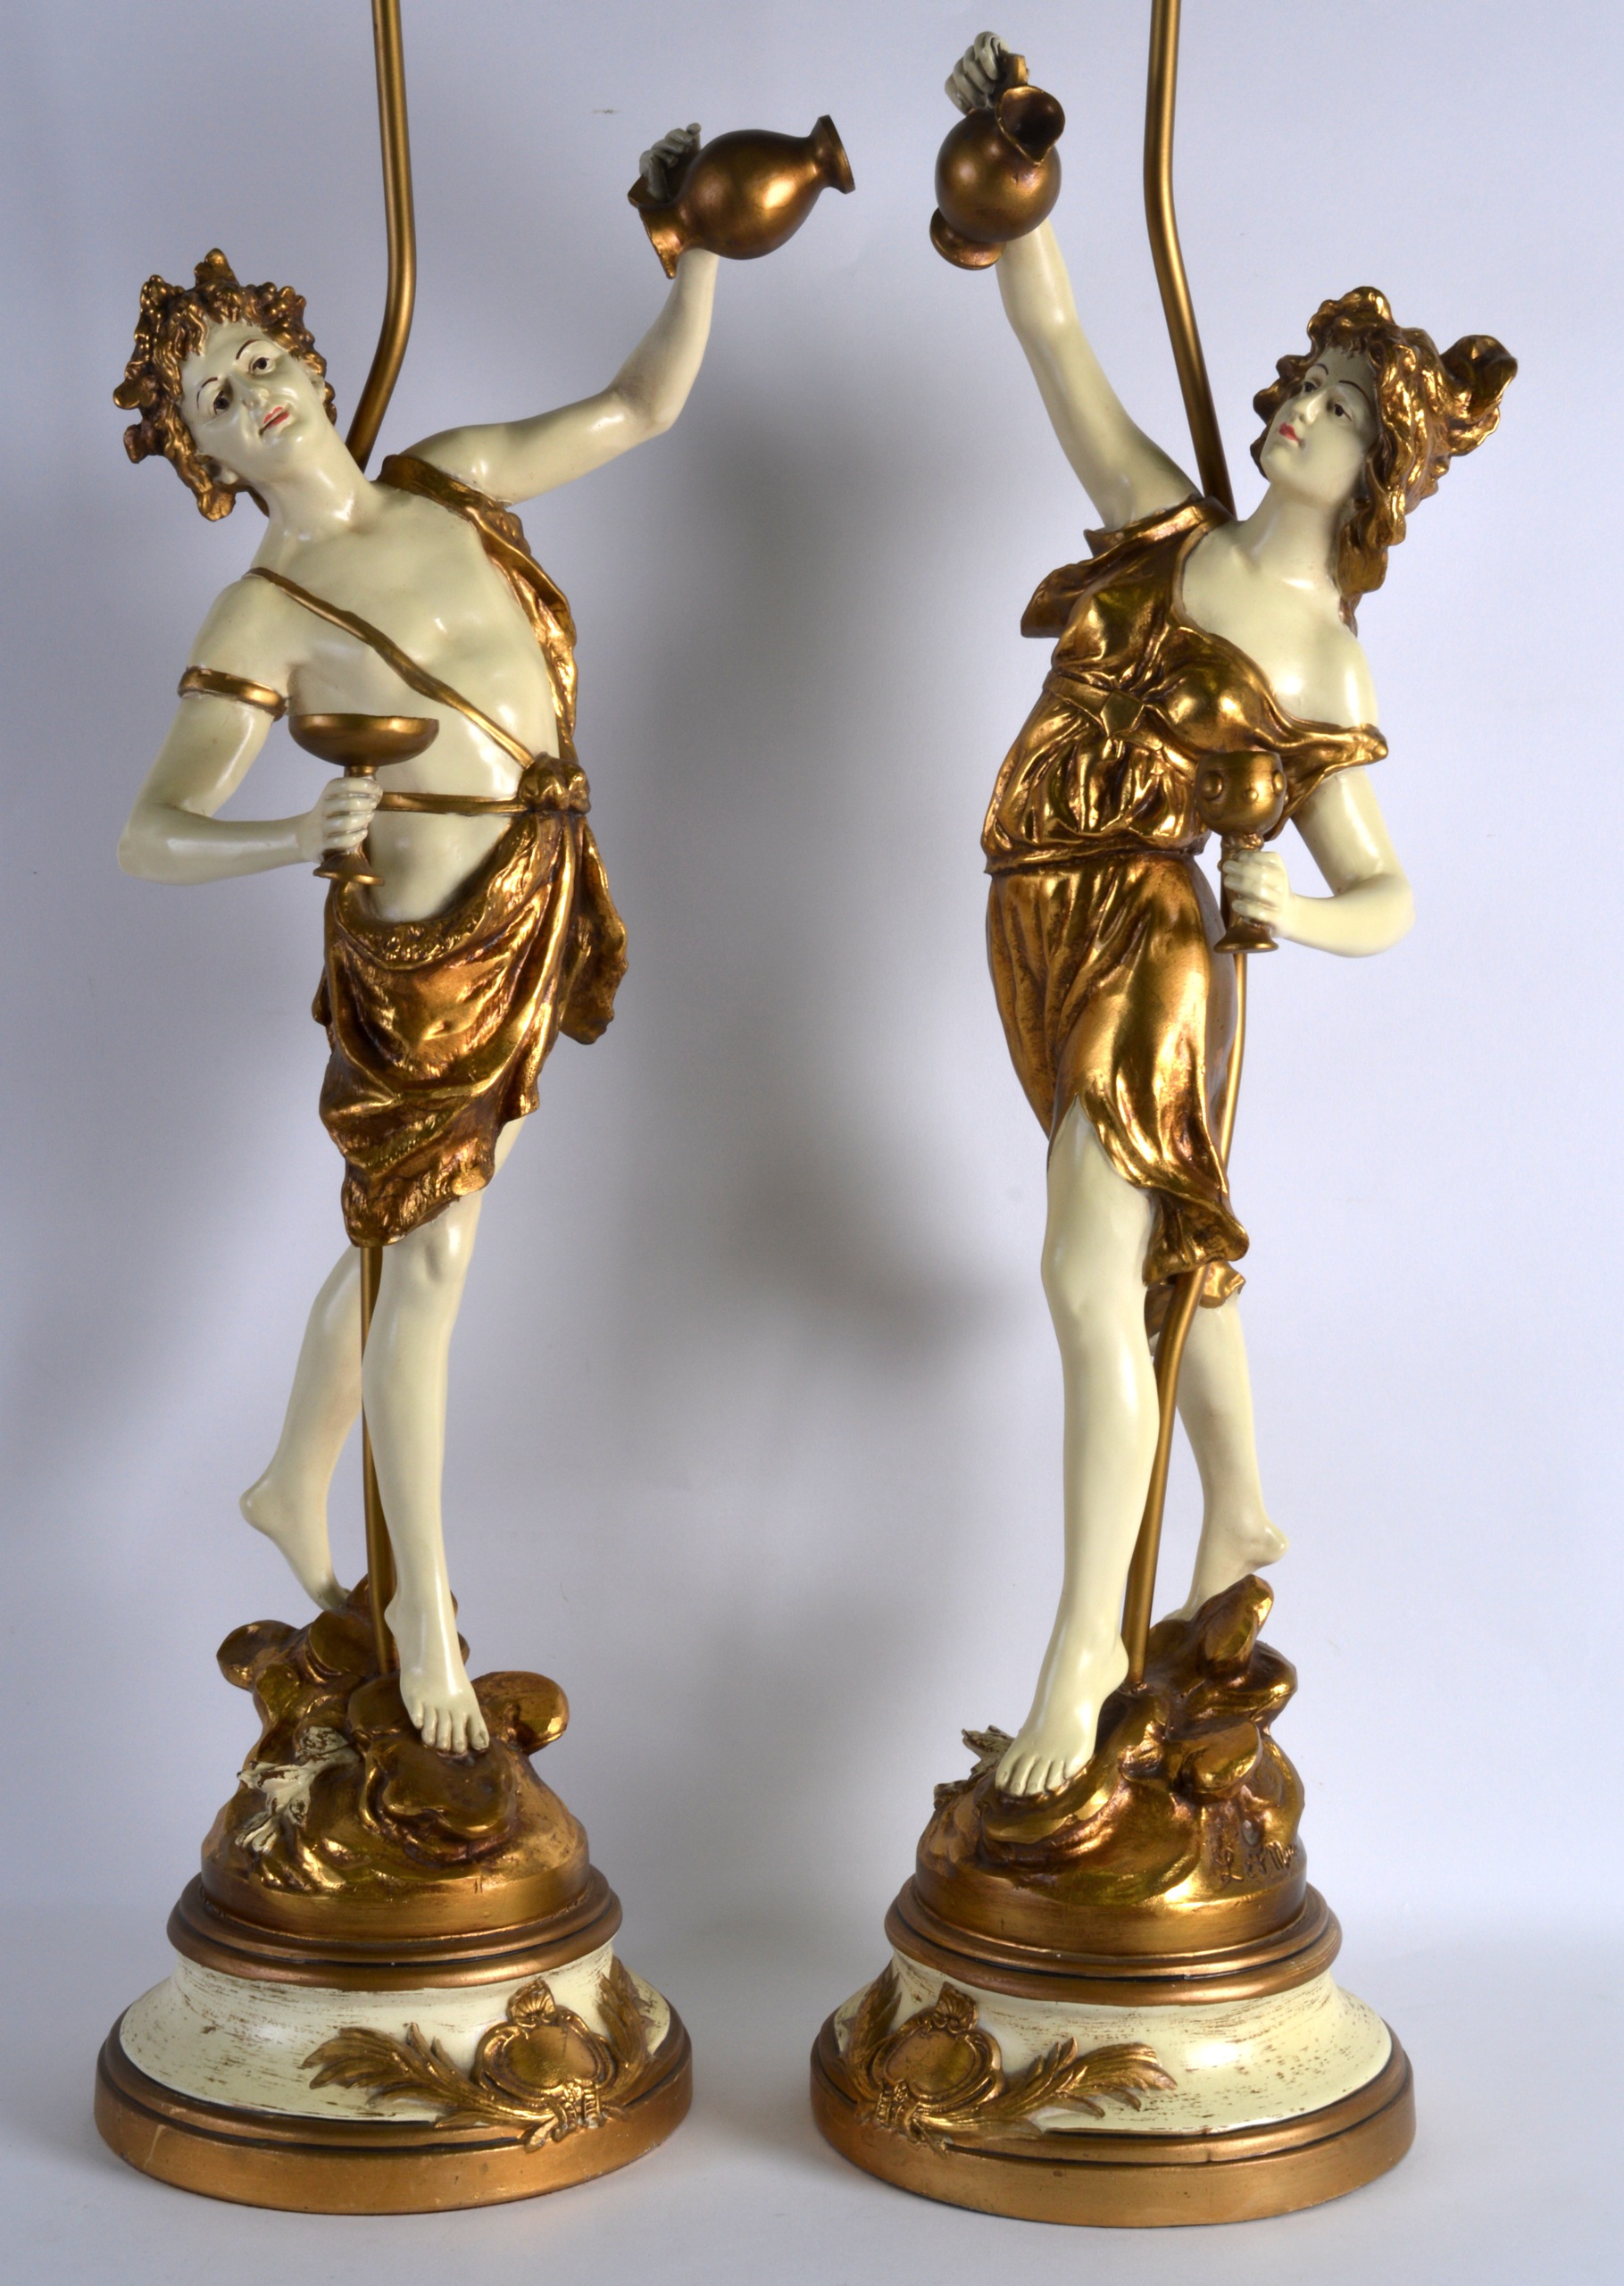 A PAIR OF EARLY 20TH CENTURY PAINTED TERRACOTTA FIGURES converted to lamps, upon painted metal